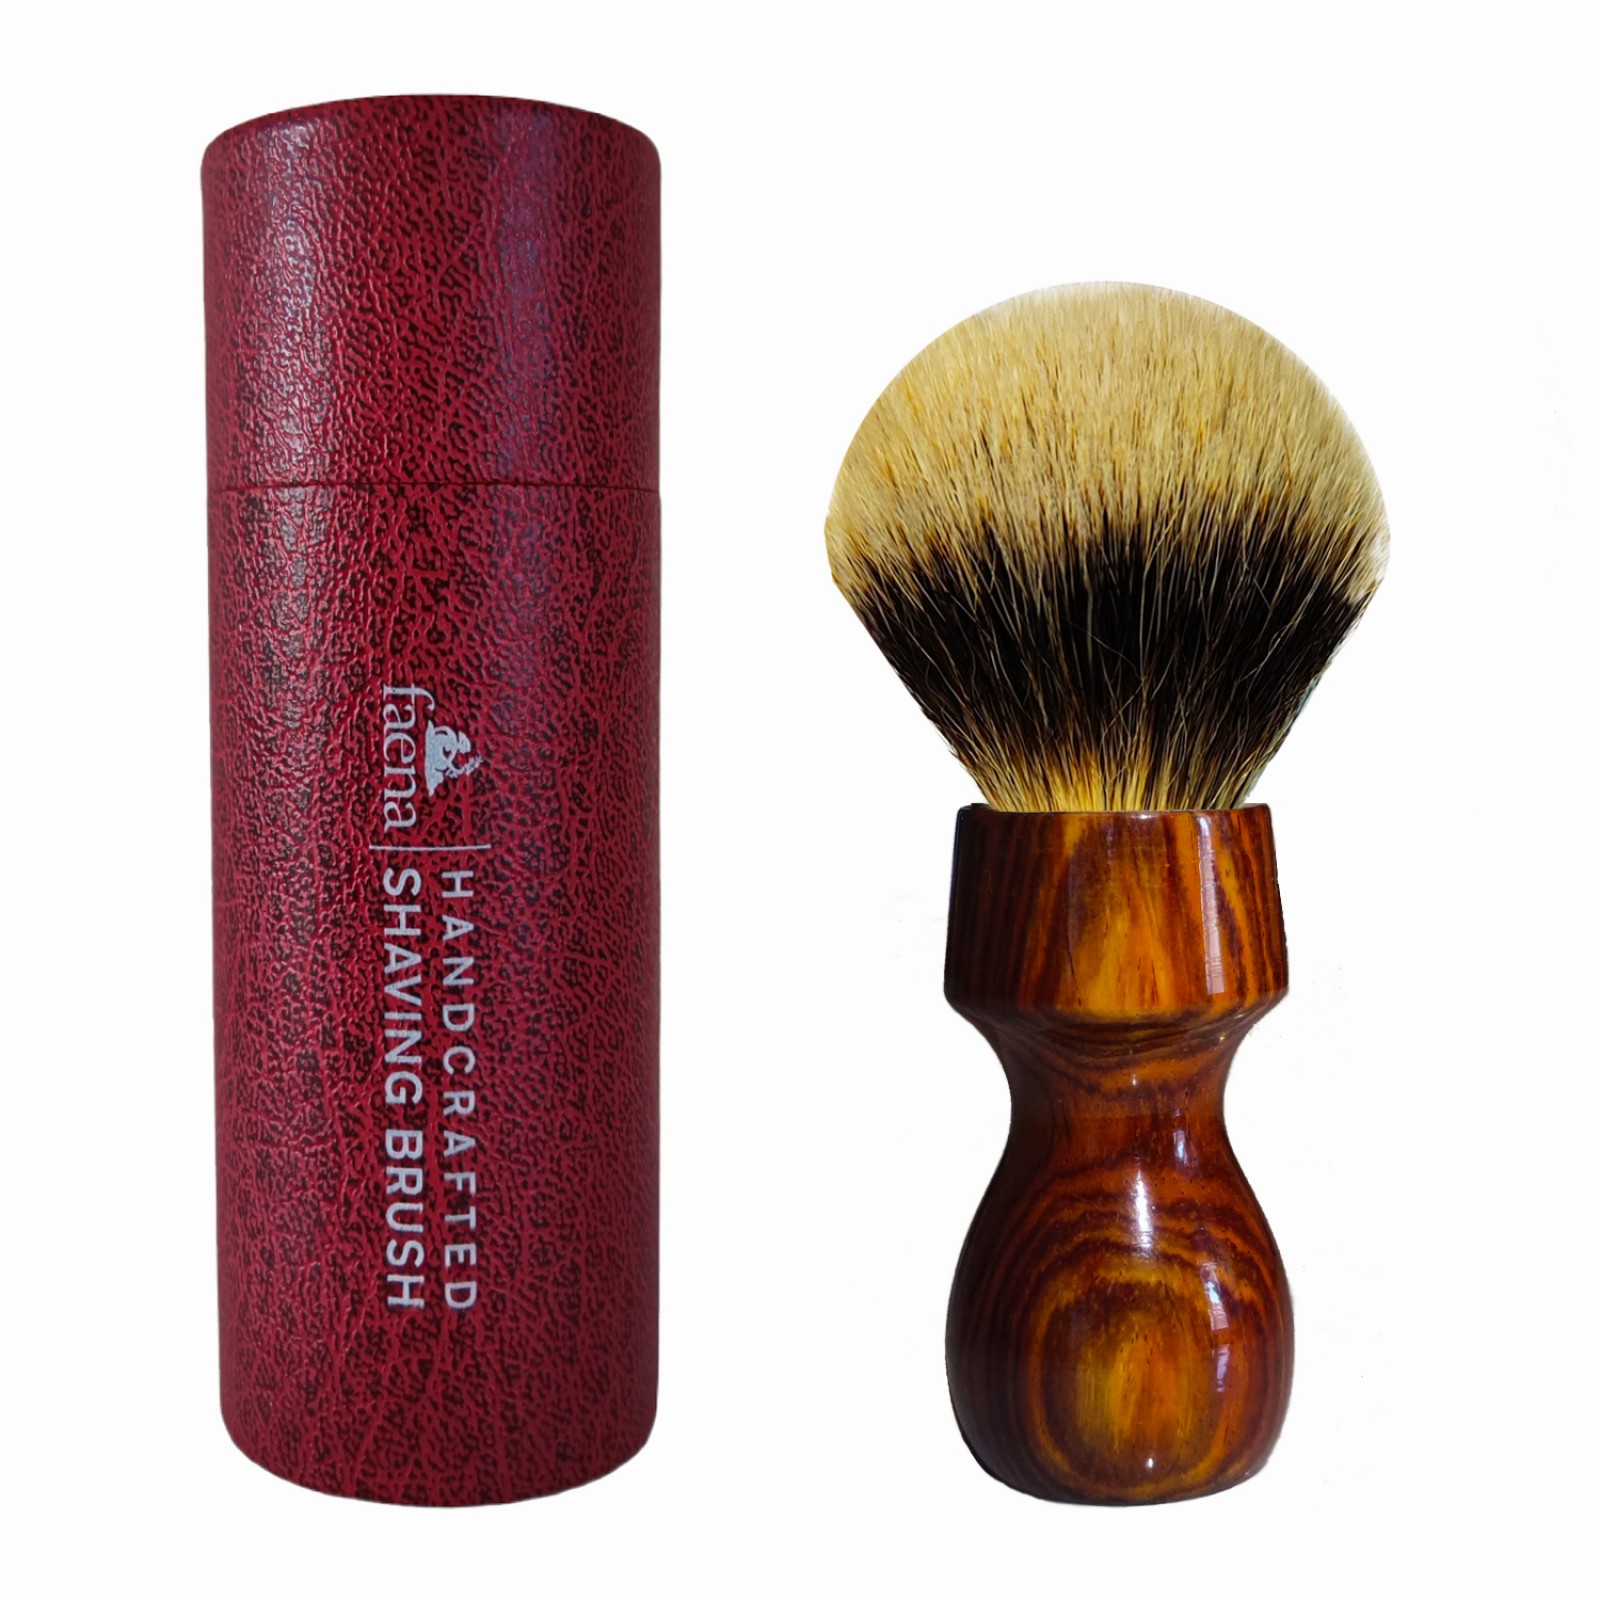 Cocobolo wood shaving brush with 24mm manchurian knot